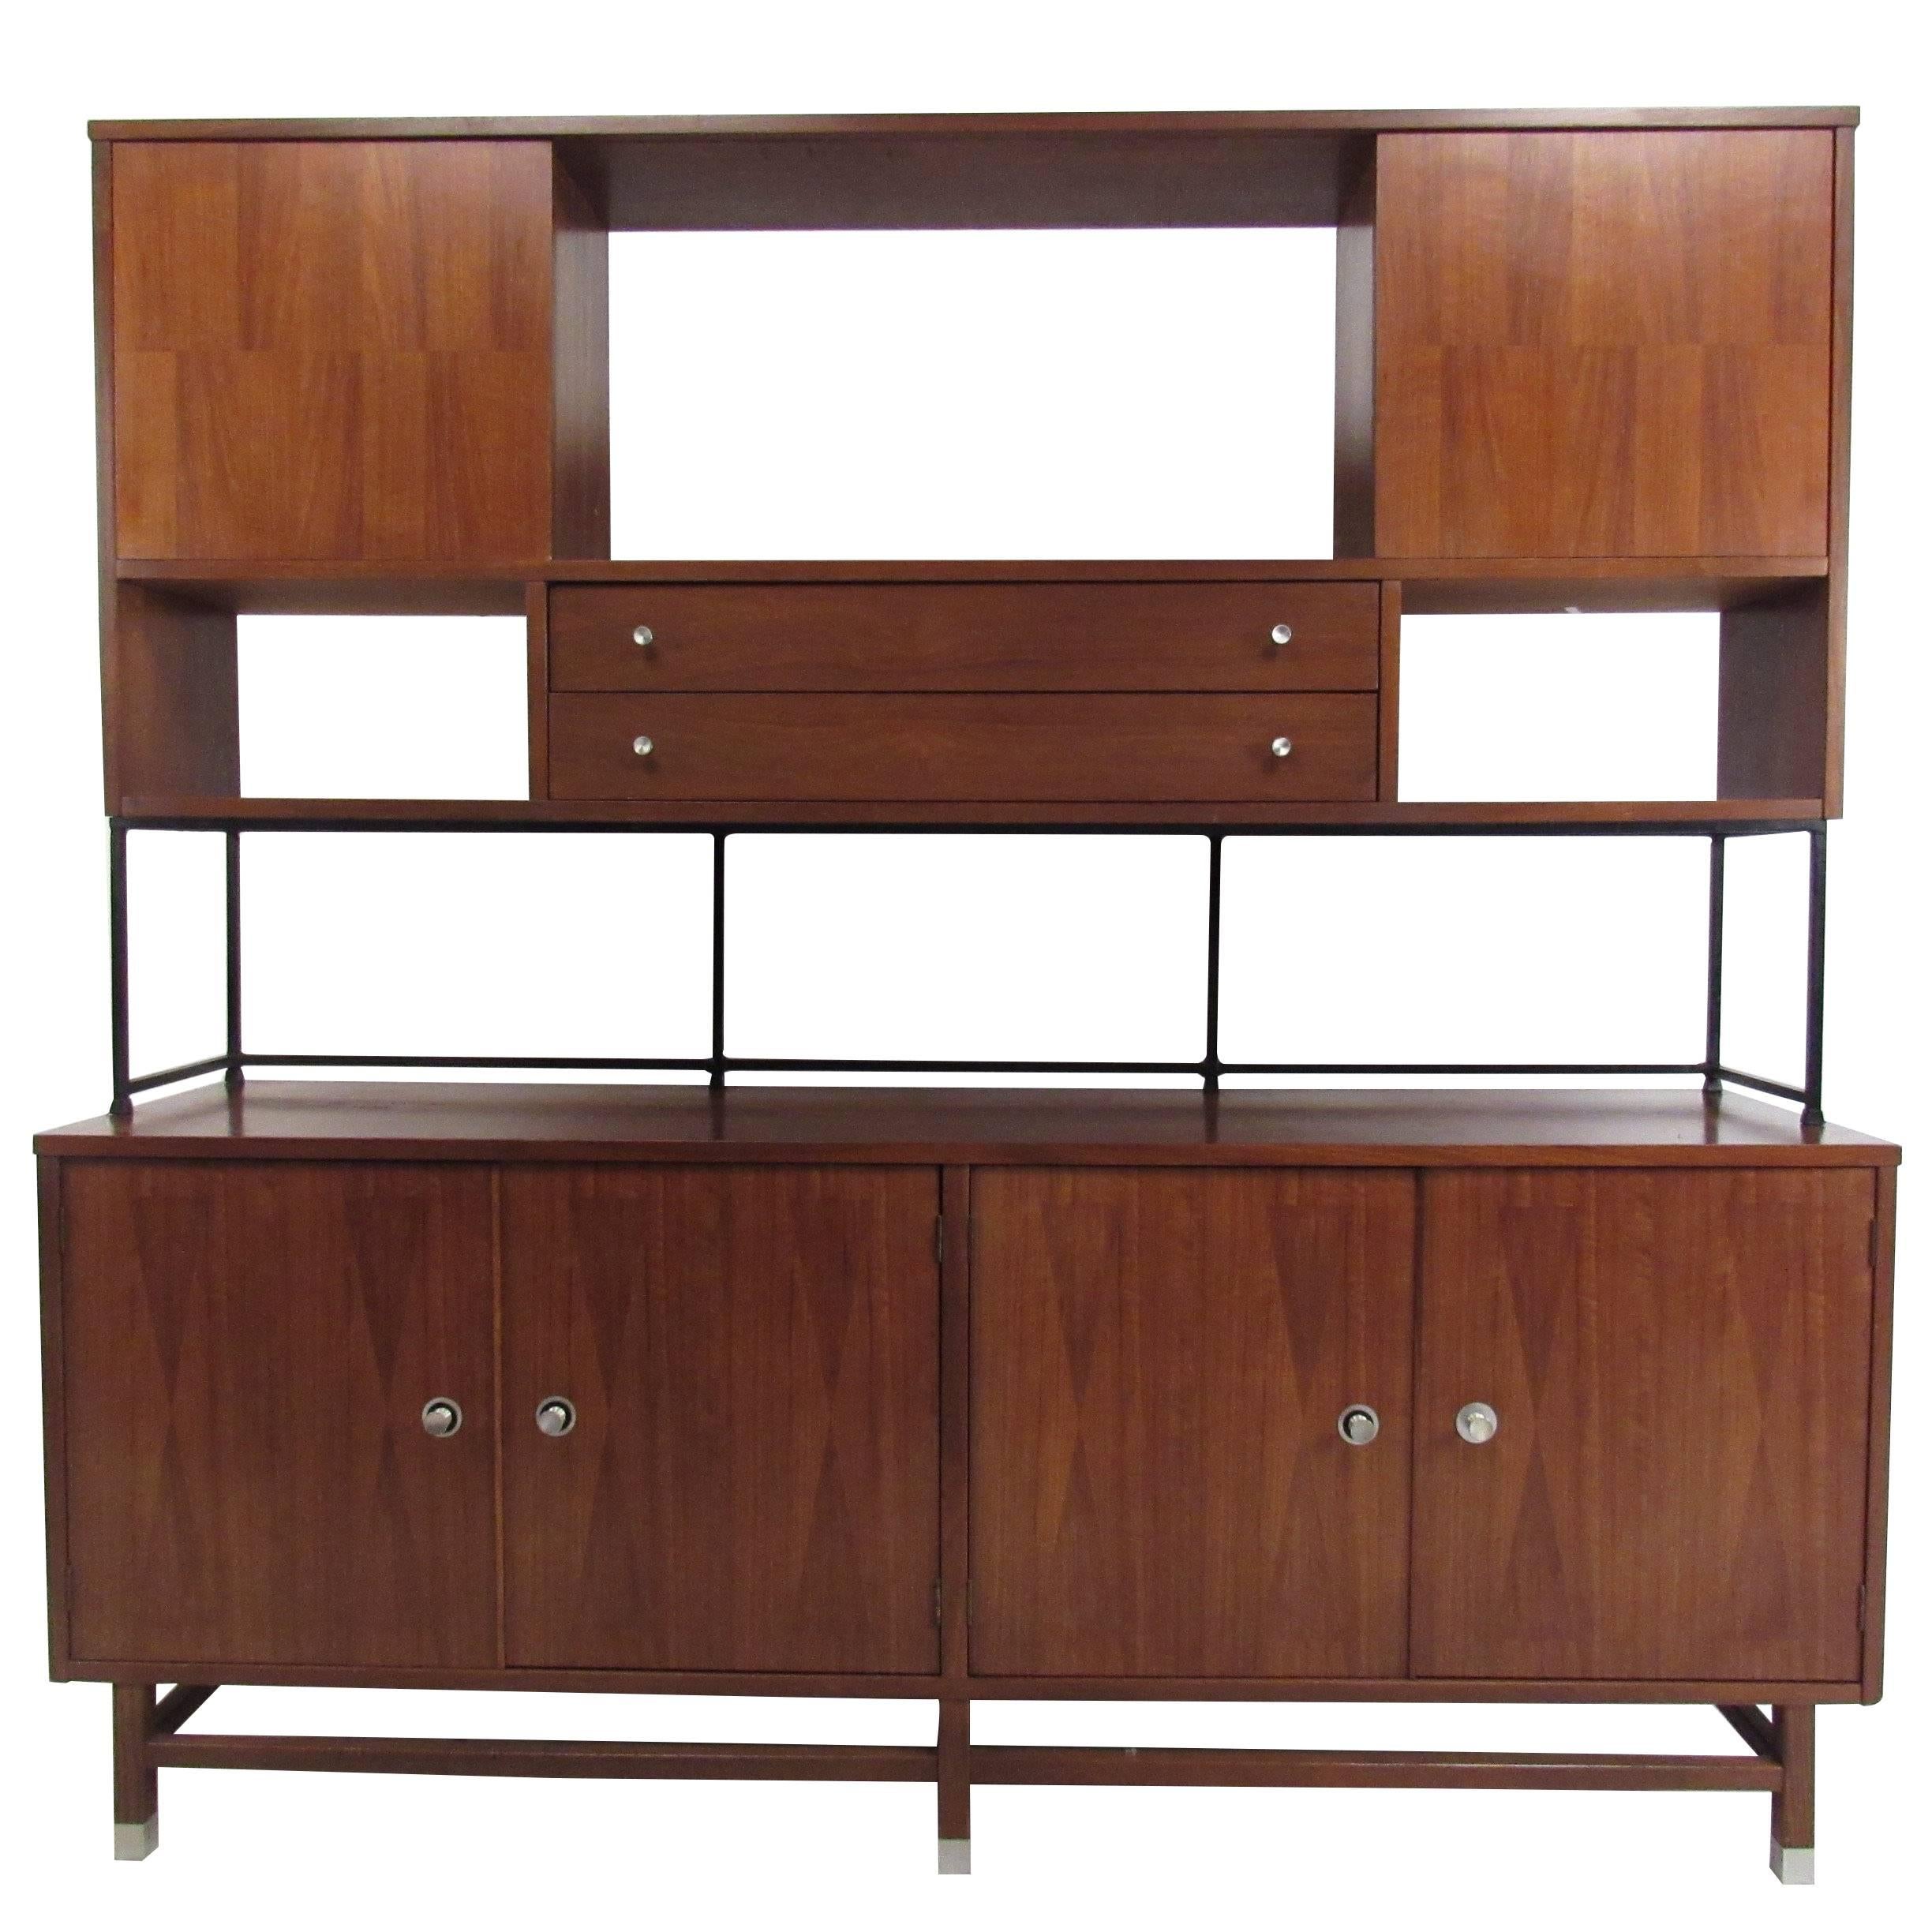 Mid-Century Modern Credenza with Display Topper by Stanley